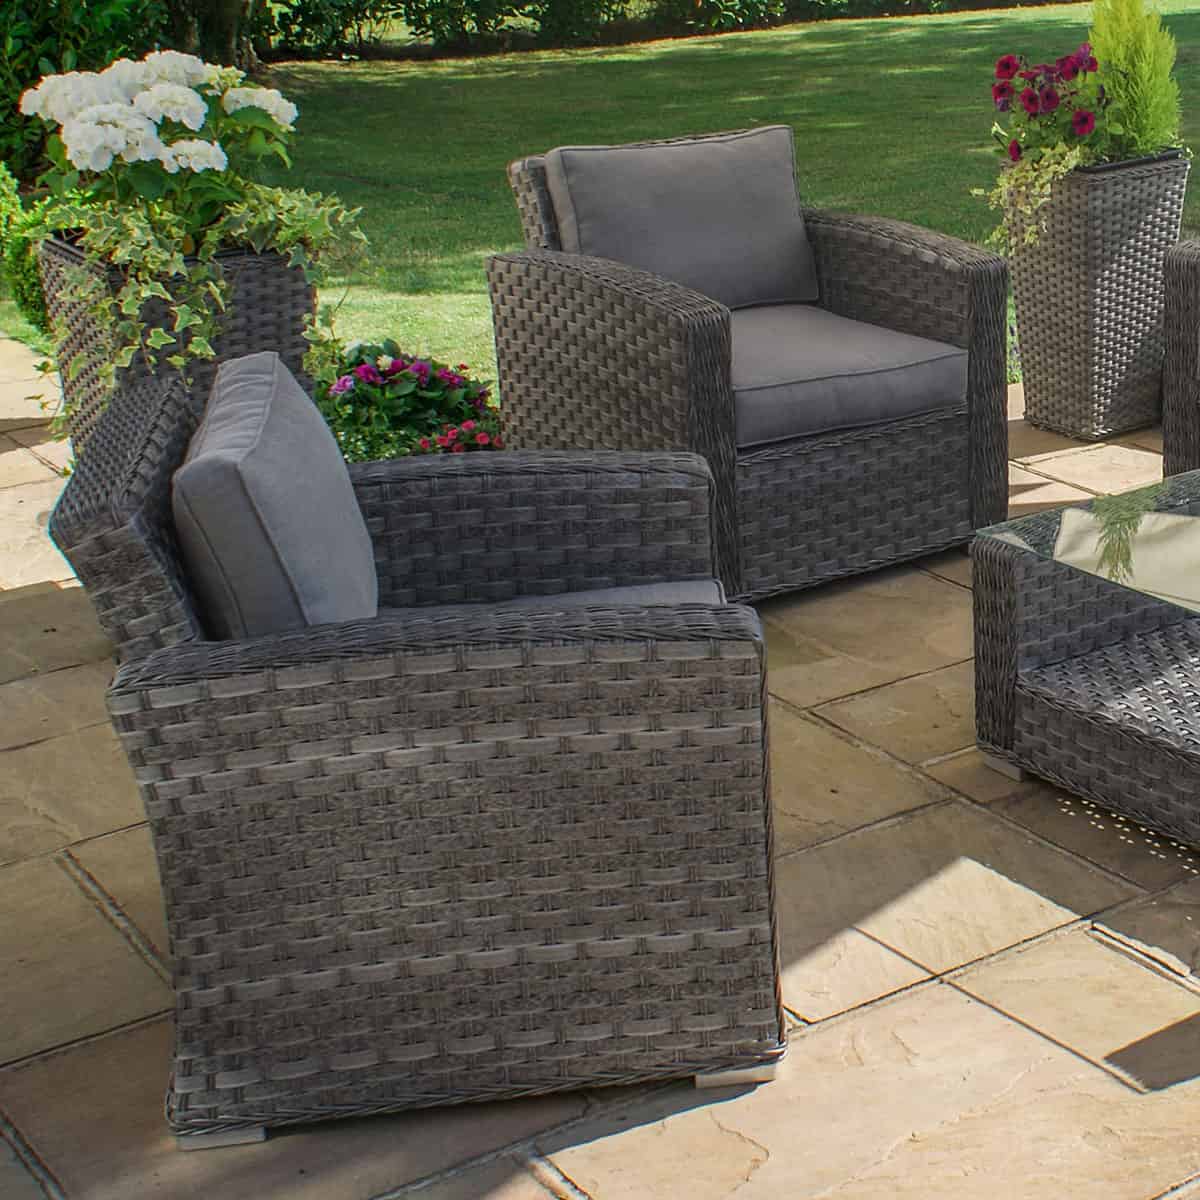 Grey rattan 3 seat sofa set with two chairs and a matching coffee table with glass table top